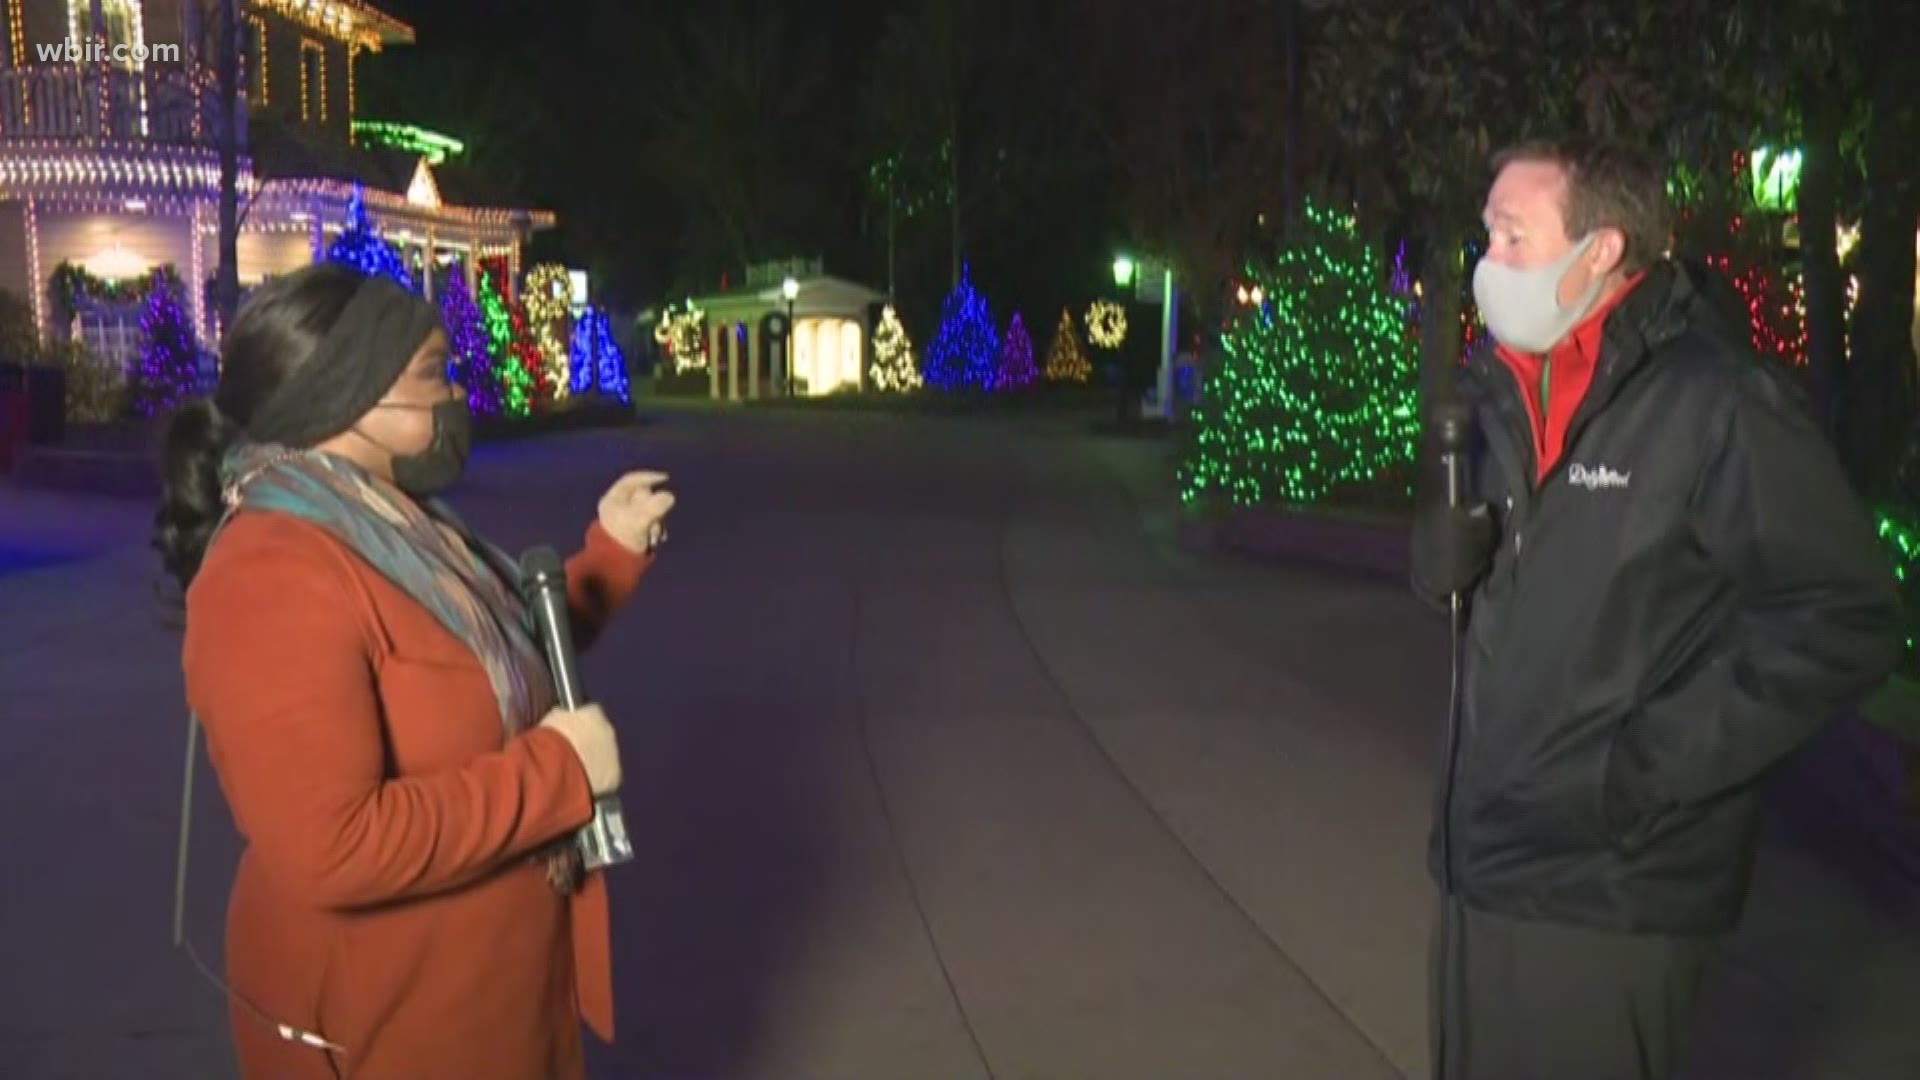 Dollywood's Wes Ramey joins us live to discuss the new changes at Dollywood's Smoky Mountain Christmas.